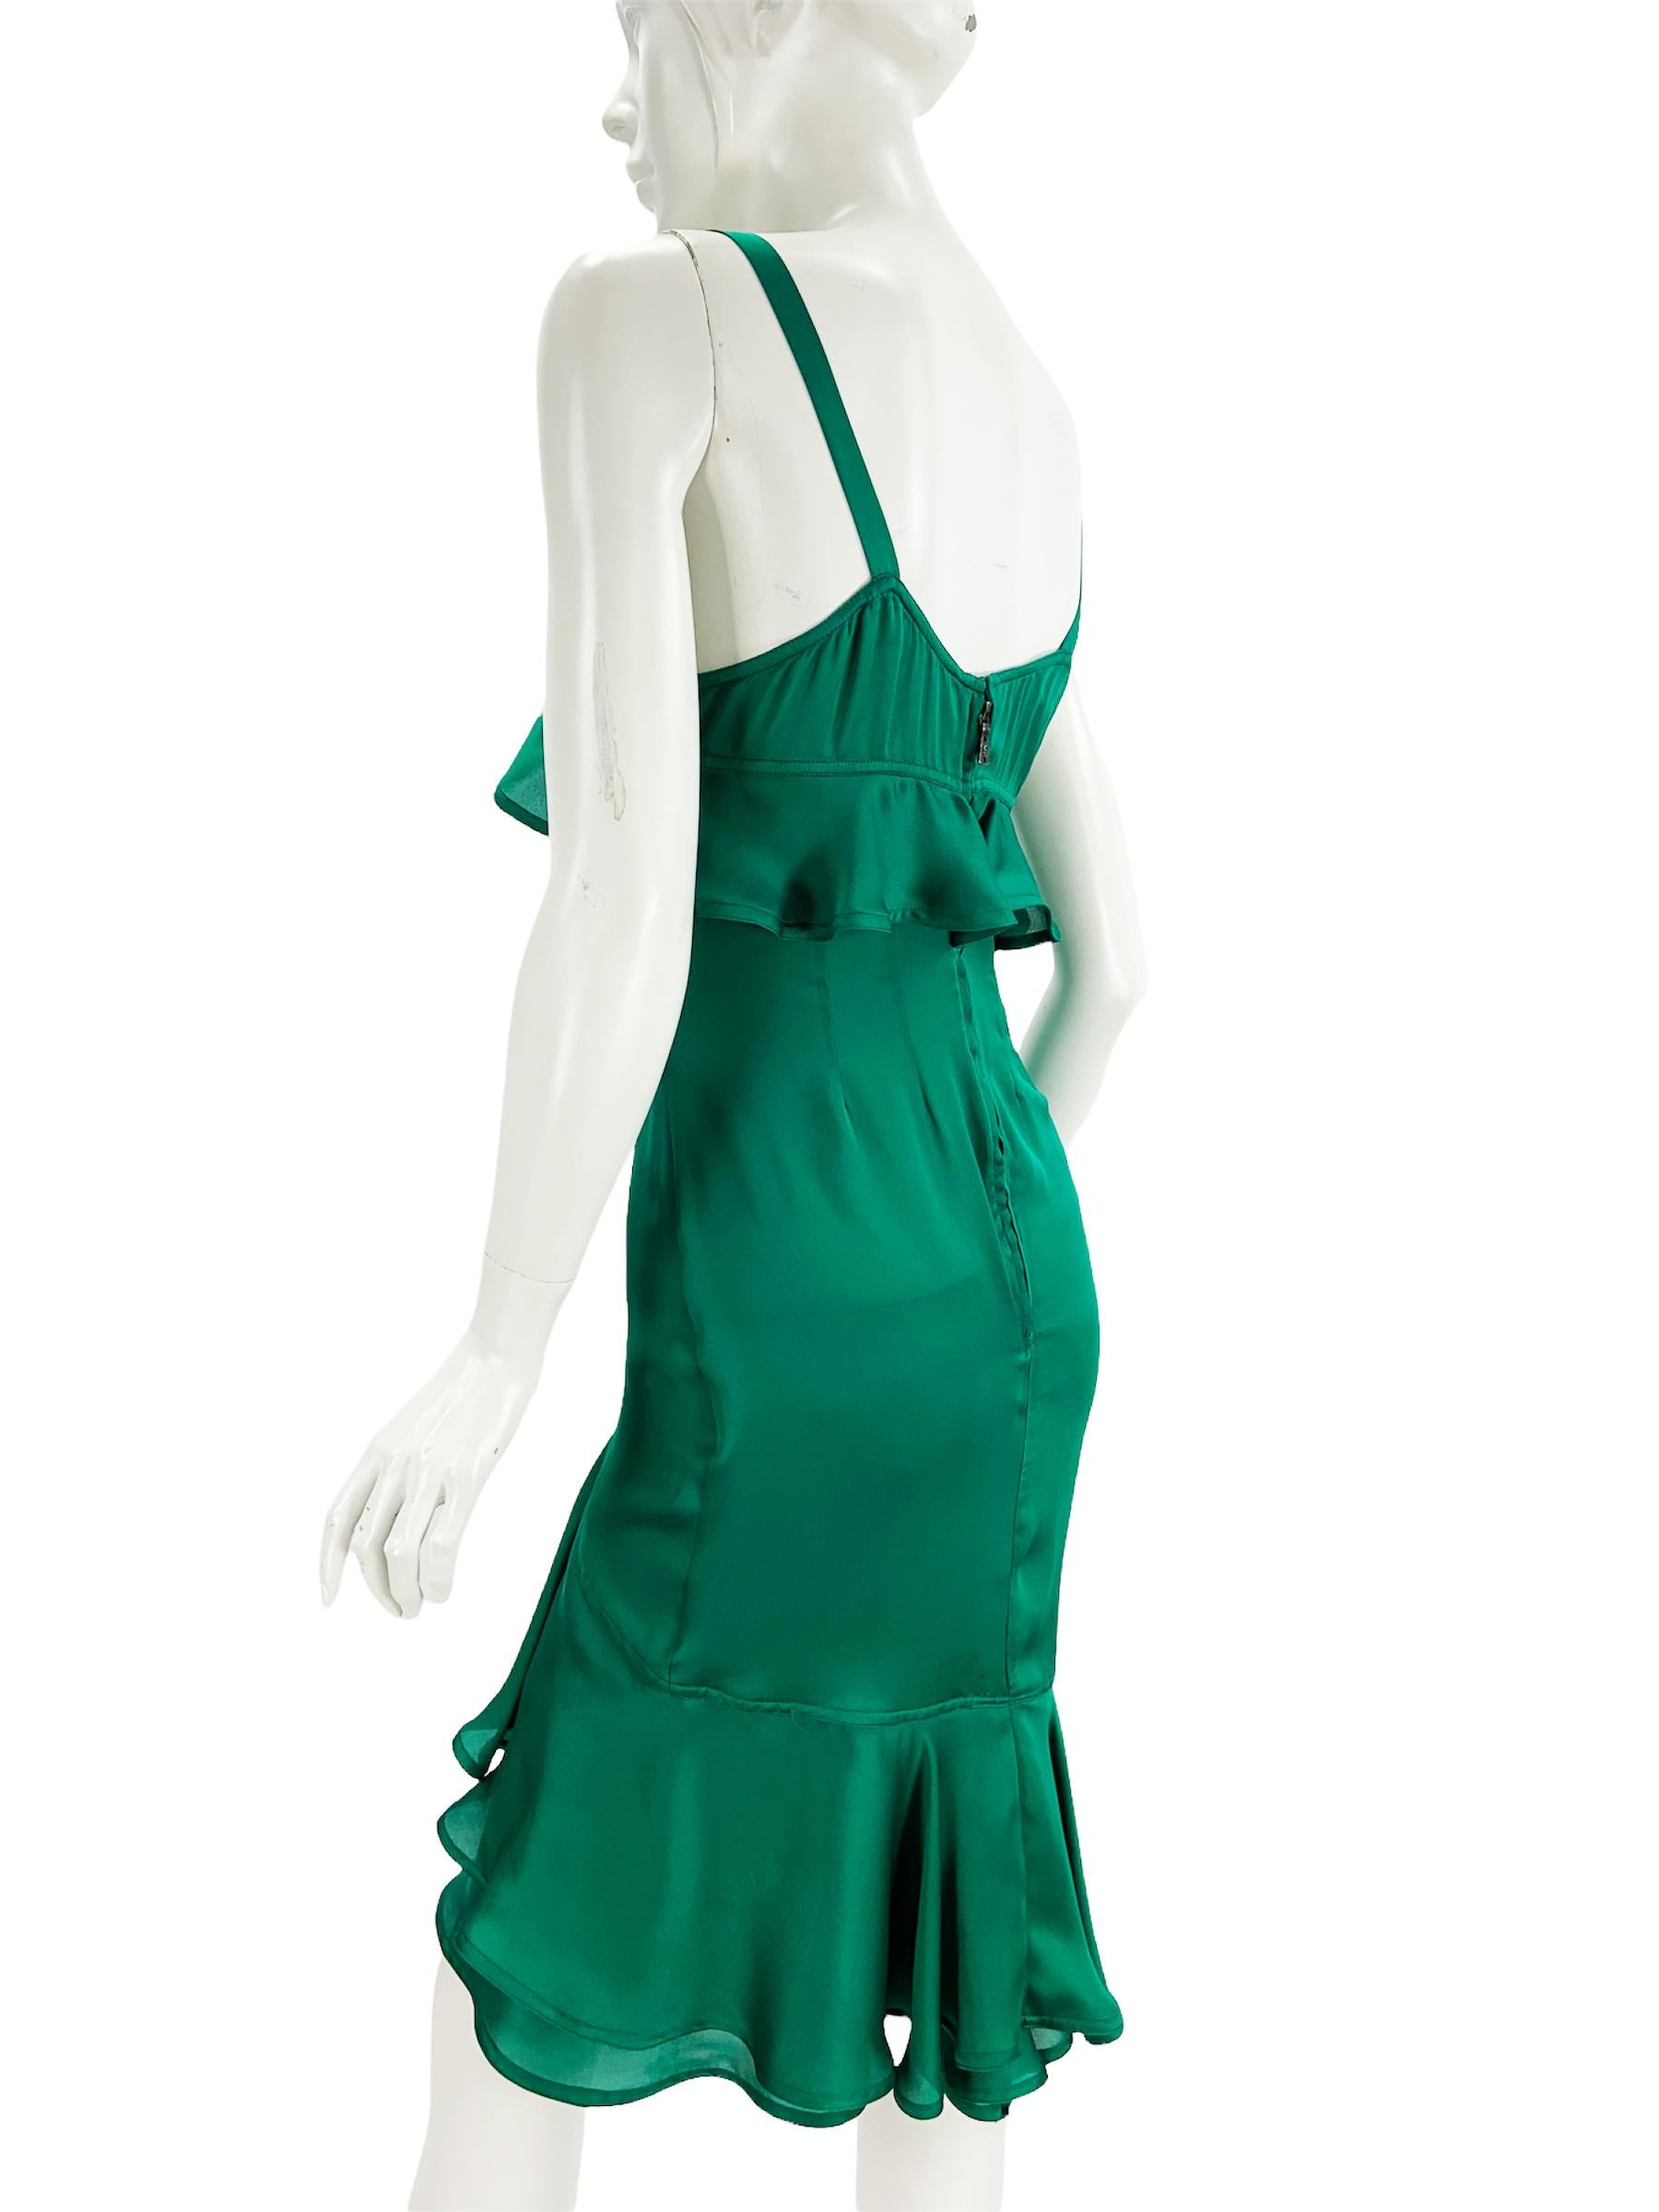 Women's Tom Ford for Yves Saint Laurent AD Campaign F/W 2003 Silk Green Ruffle Dress   For Sale